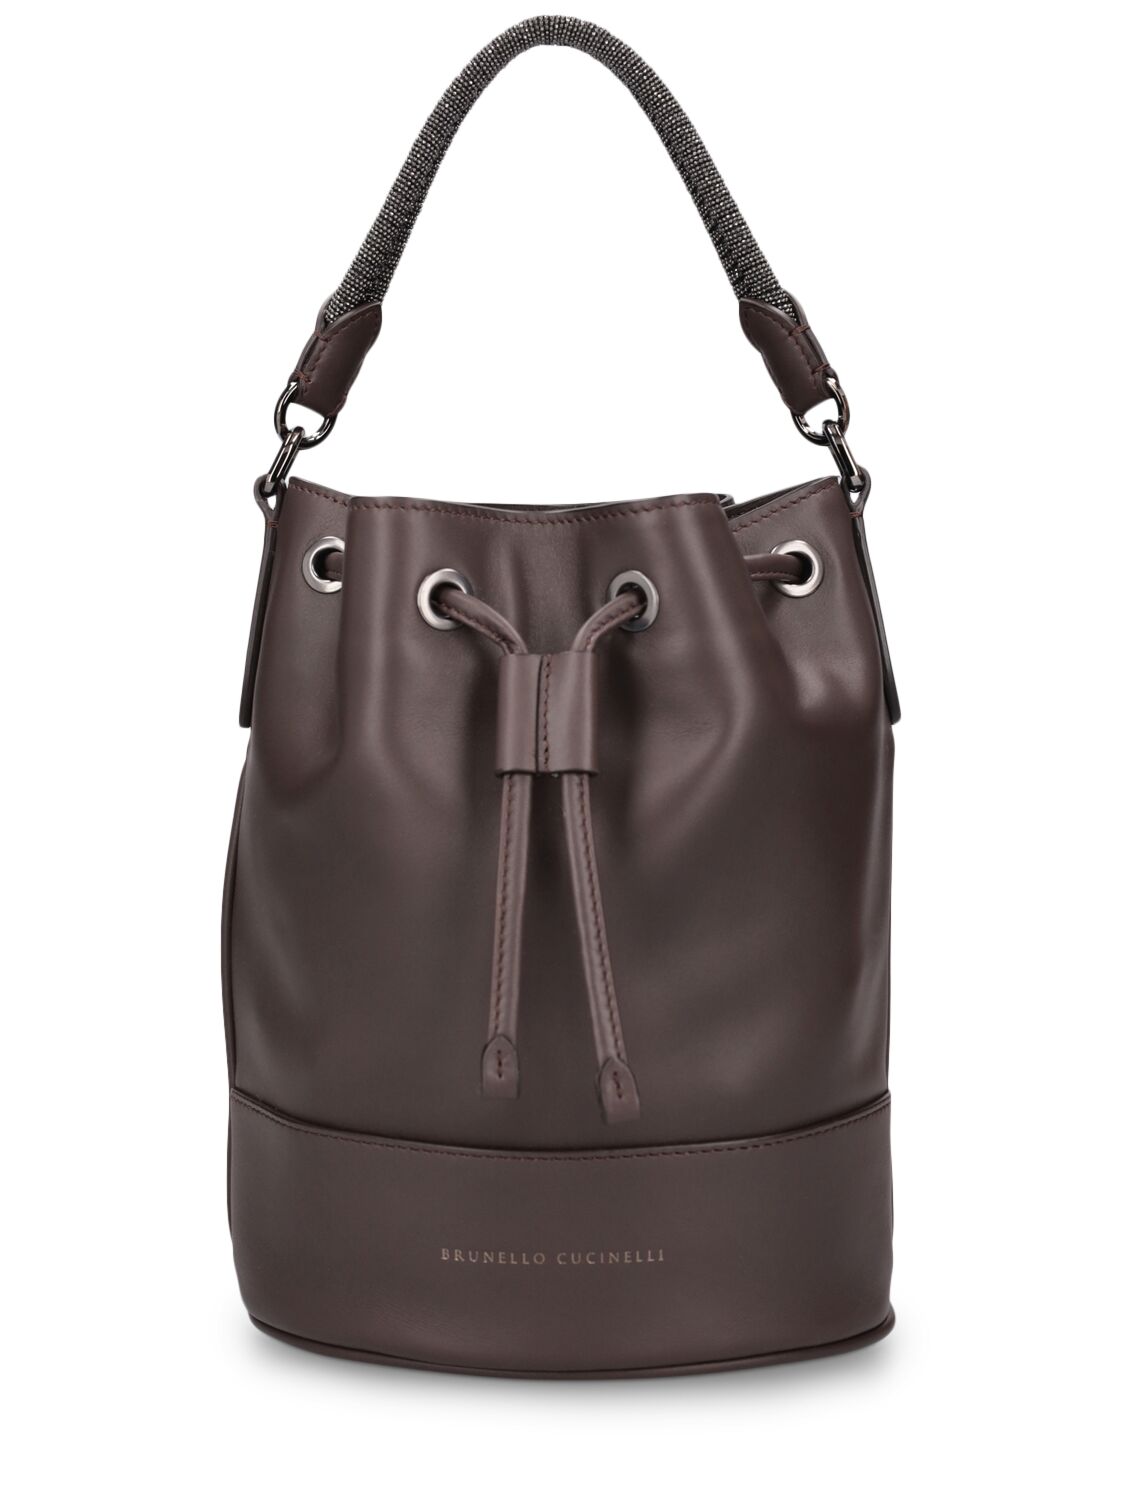 Brunello Cucinelli Softy Leather Bucket Bag In Towny